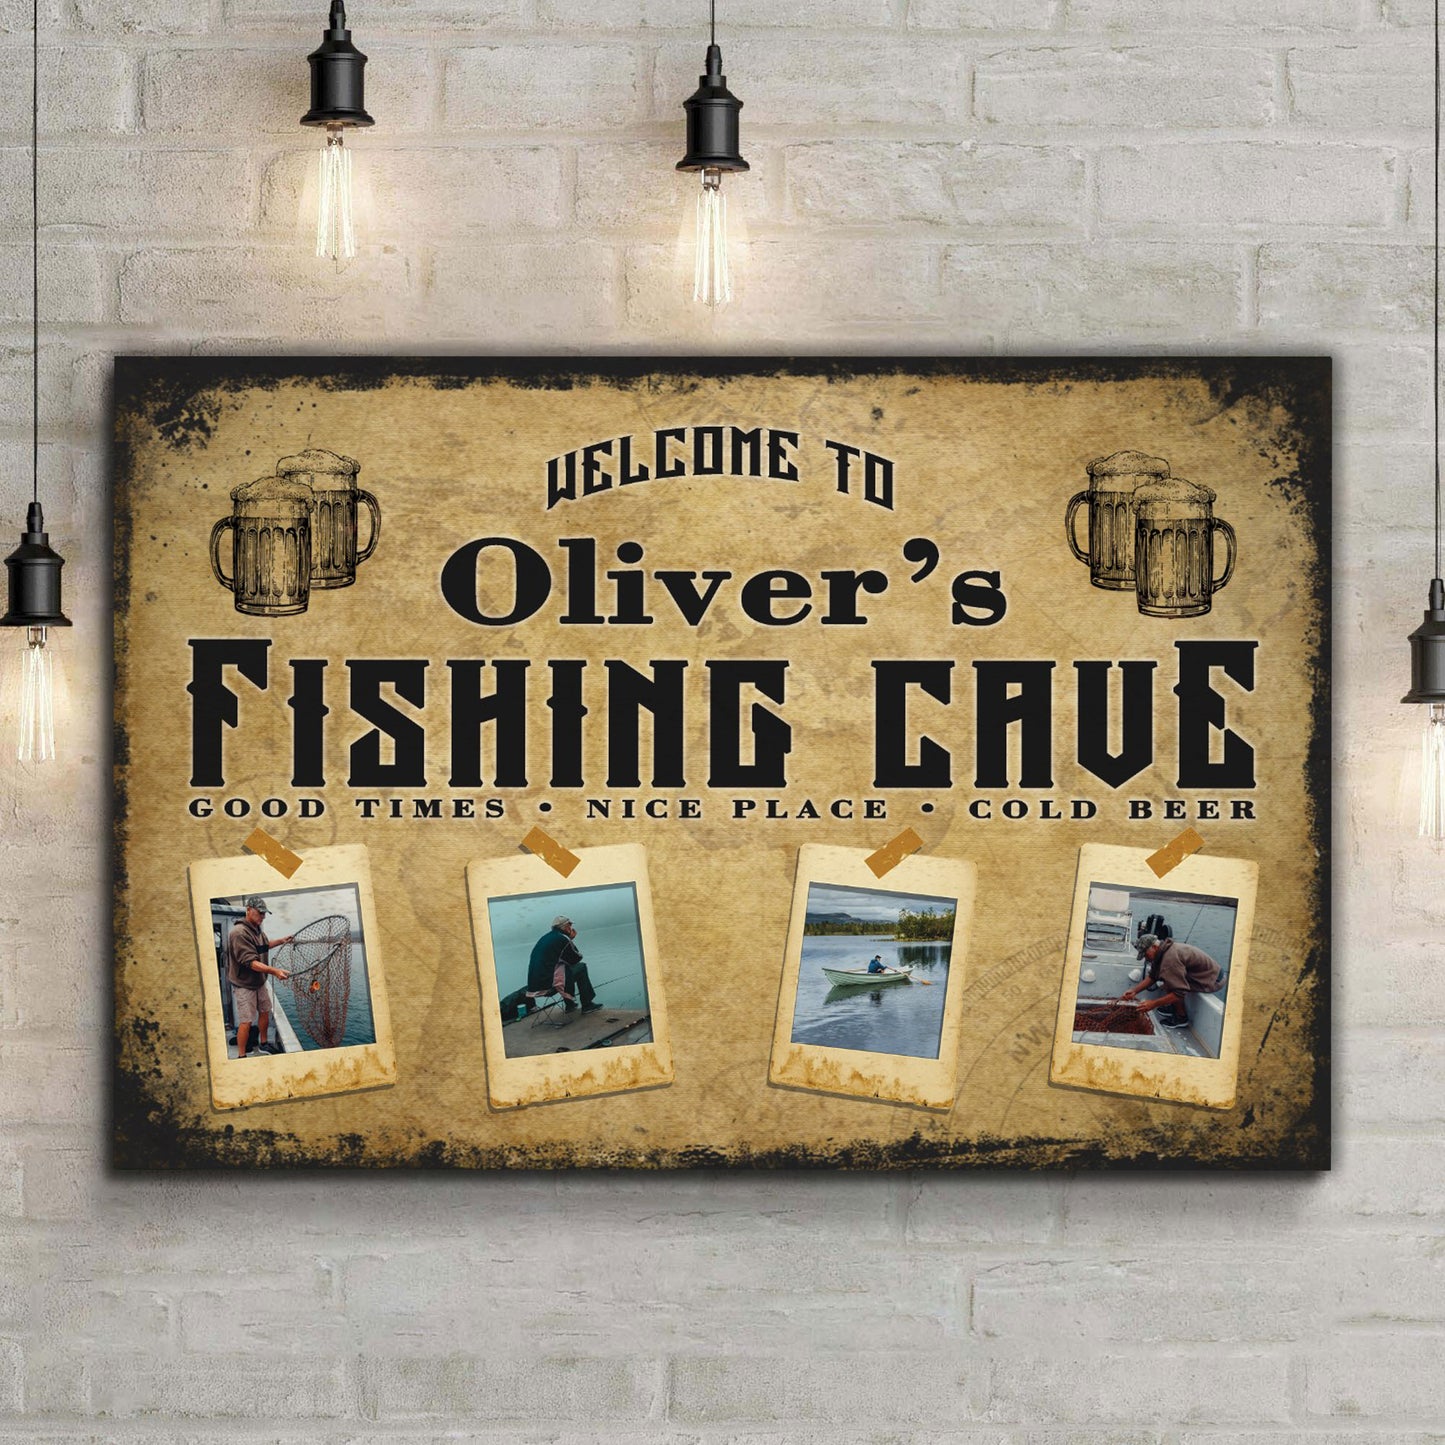 Welcome Fishing Cave Sign - Image by Tailored Canvases